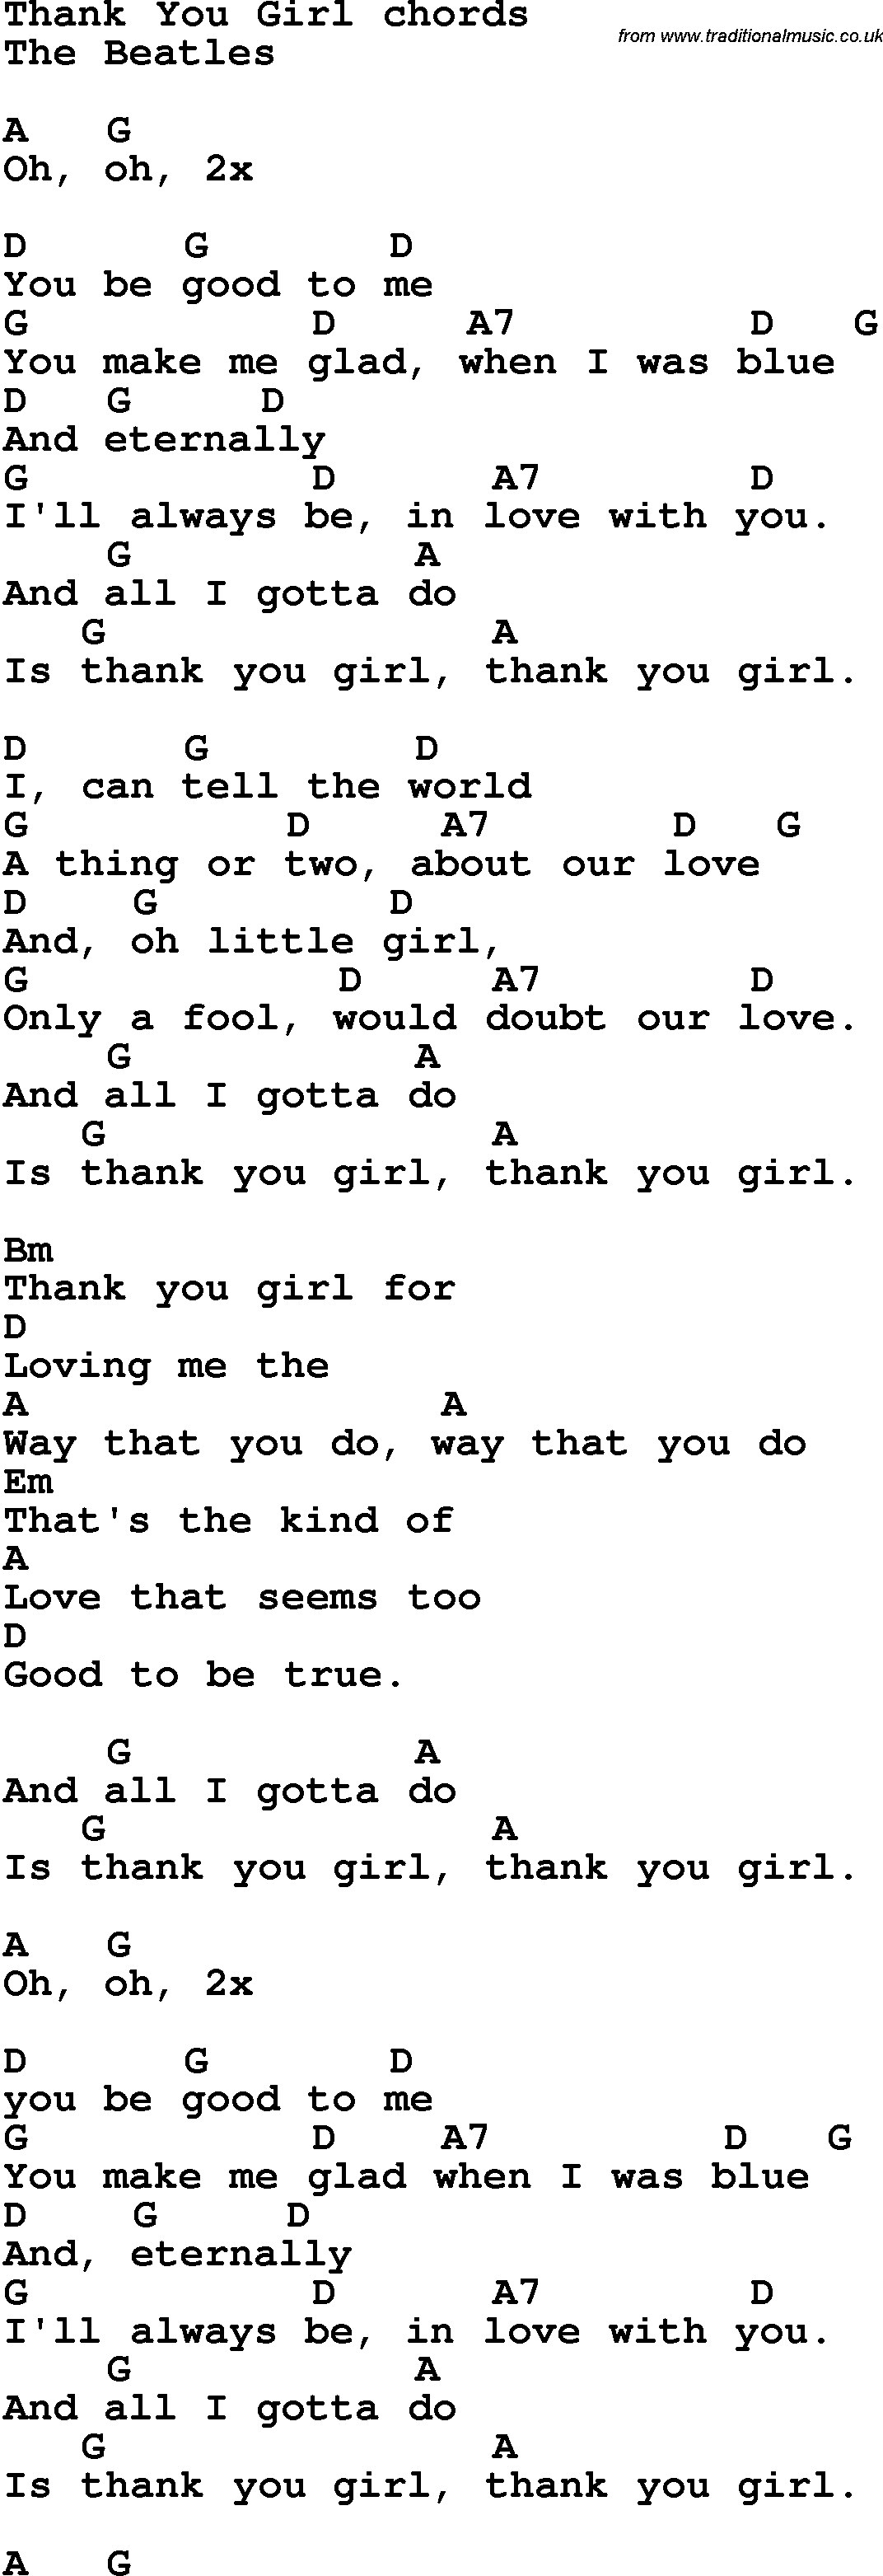 Song Lyrics with guitar chords for Thank You Girl - The Beatles